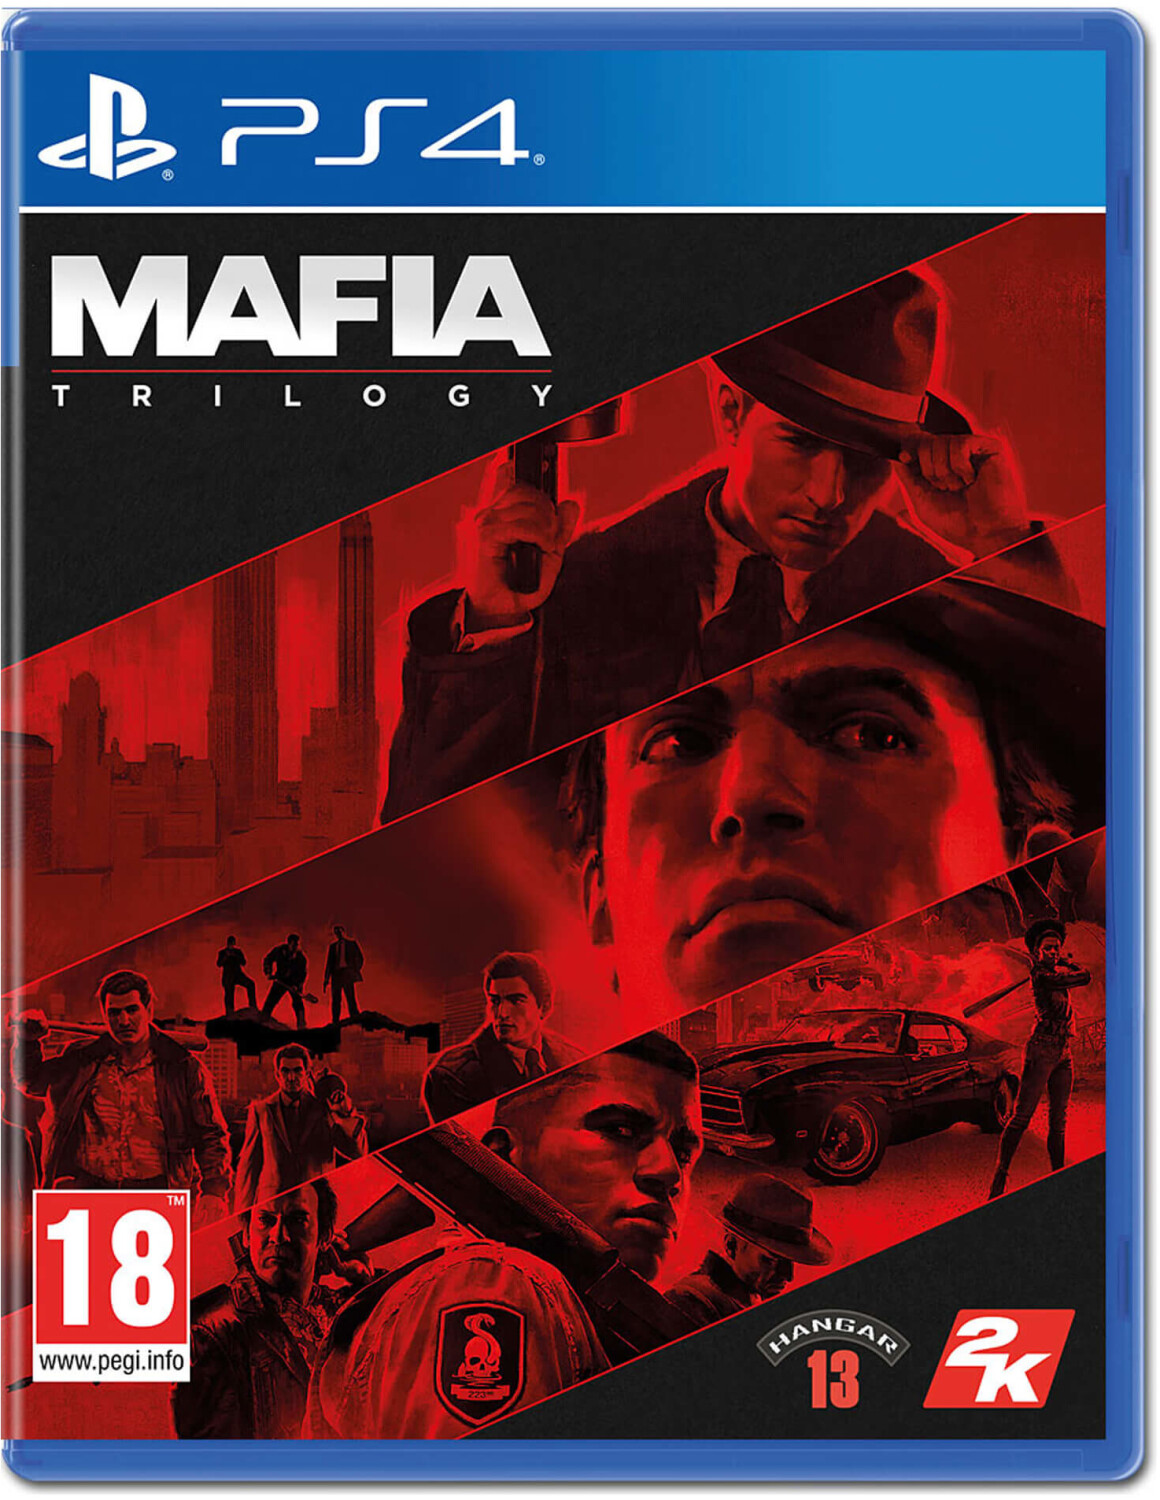 Buy Mafia: Trilogy from £20.95 (Today) – Best Deals on